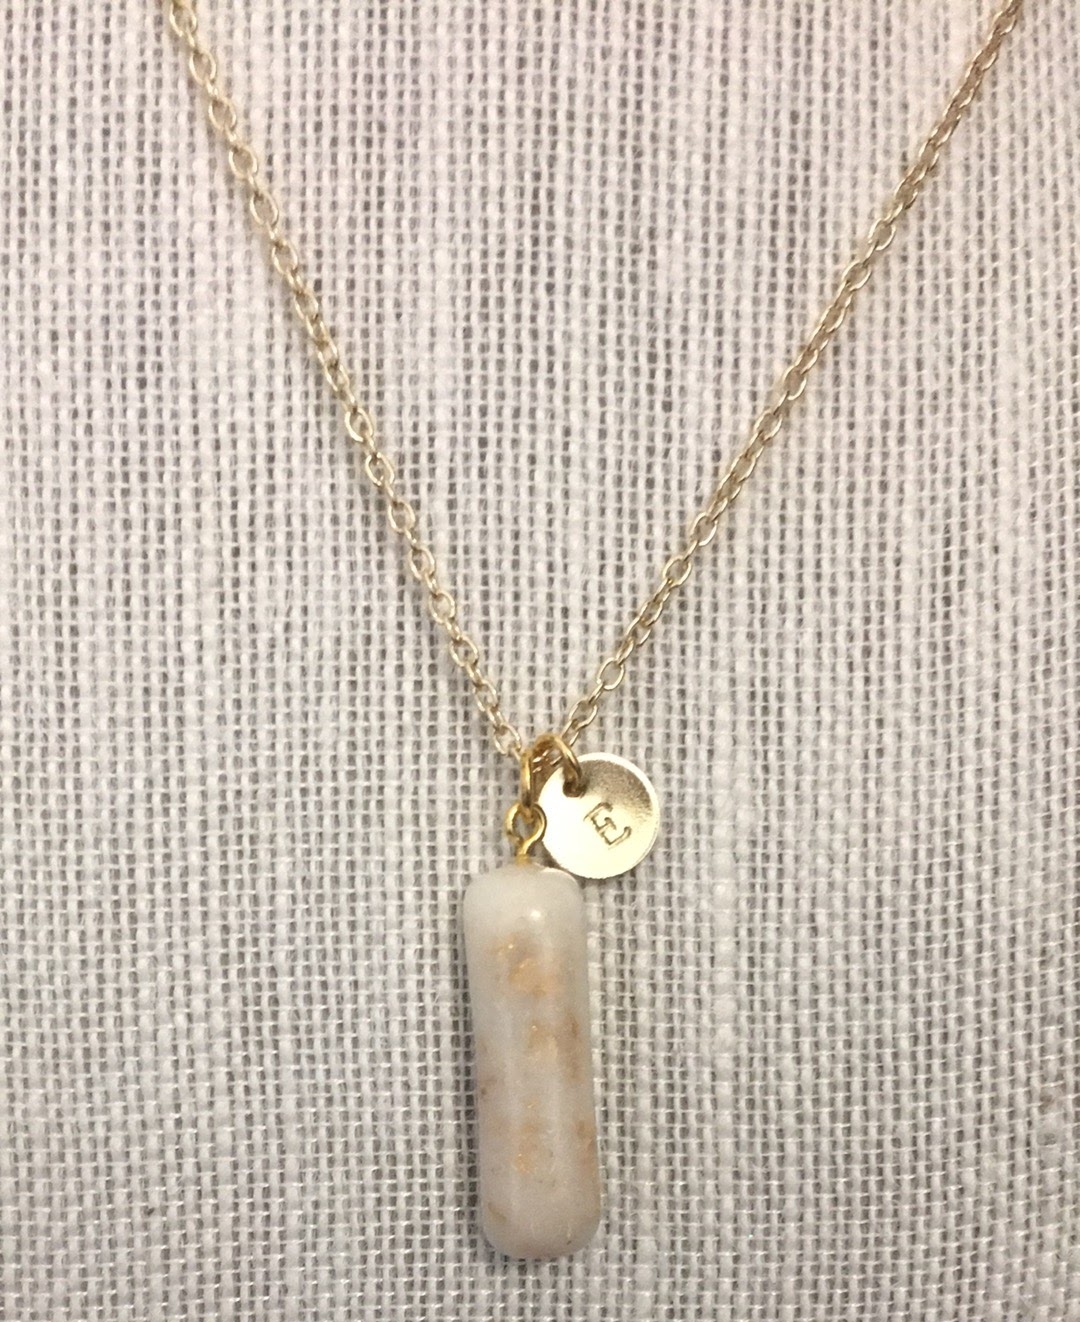 Milk Bar Necklace — Made With Love Keepsakes Breastmilk & Dna Jewelry